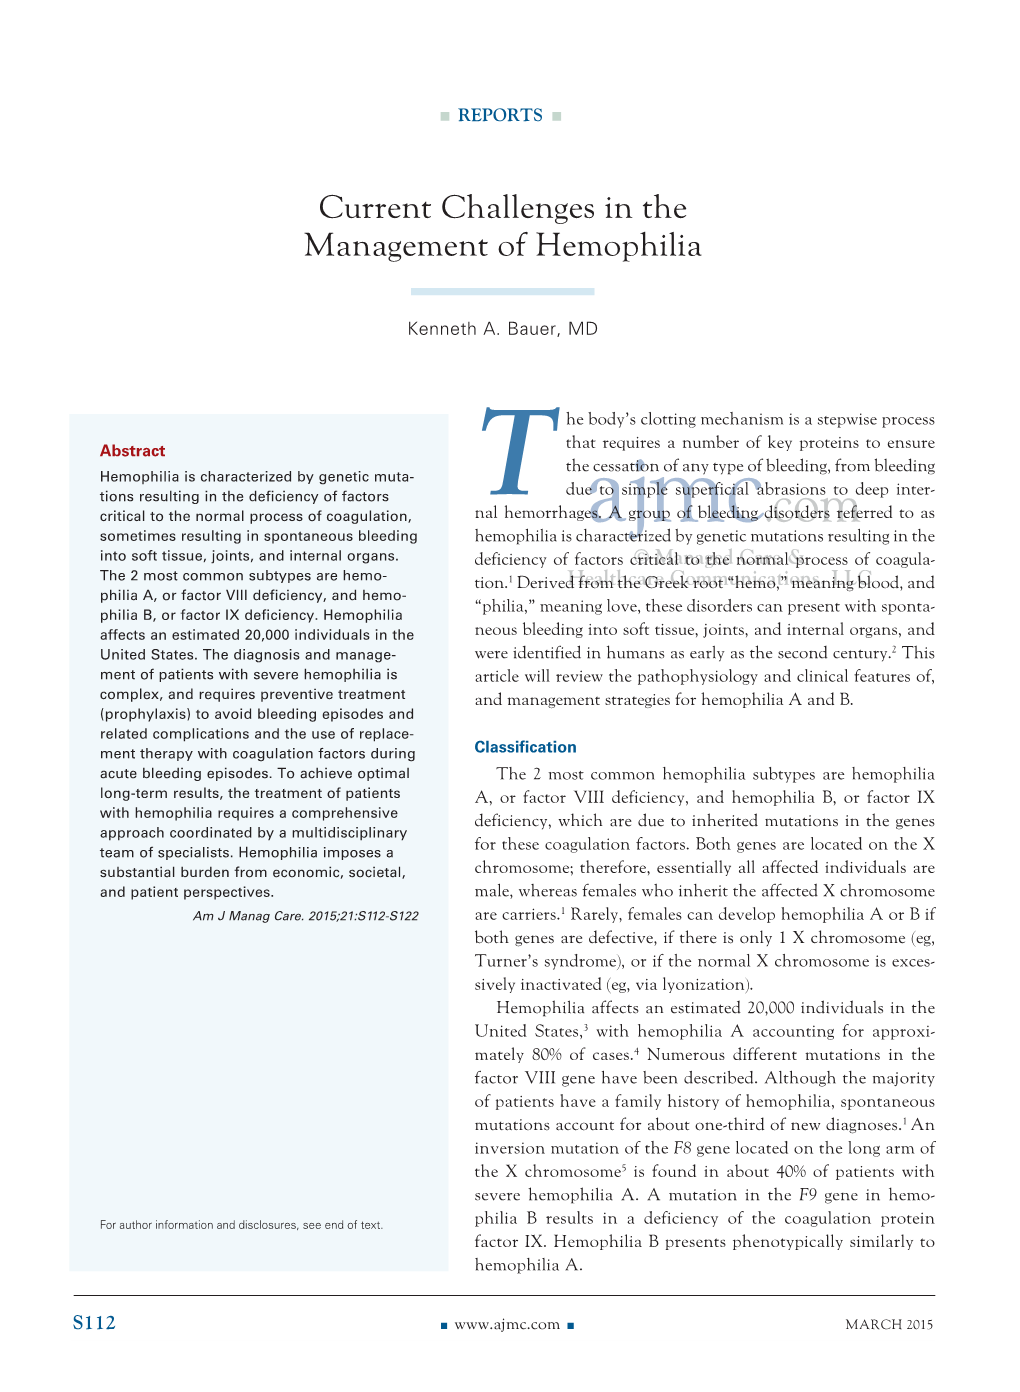 Current Challenges in the Management of Hemophilia